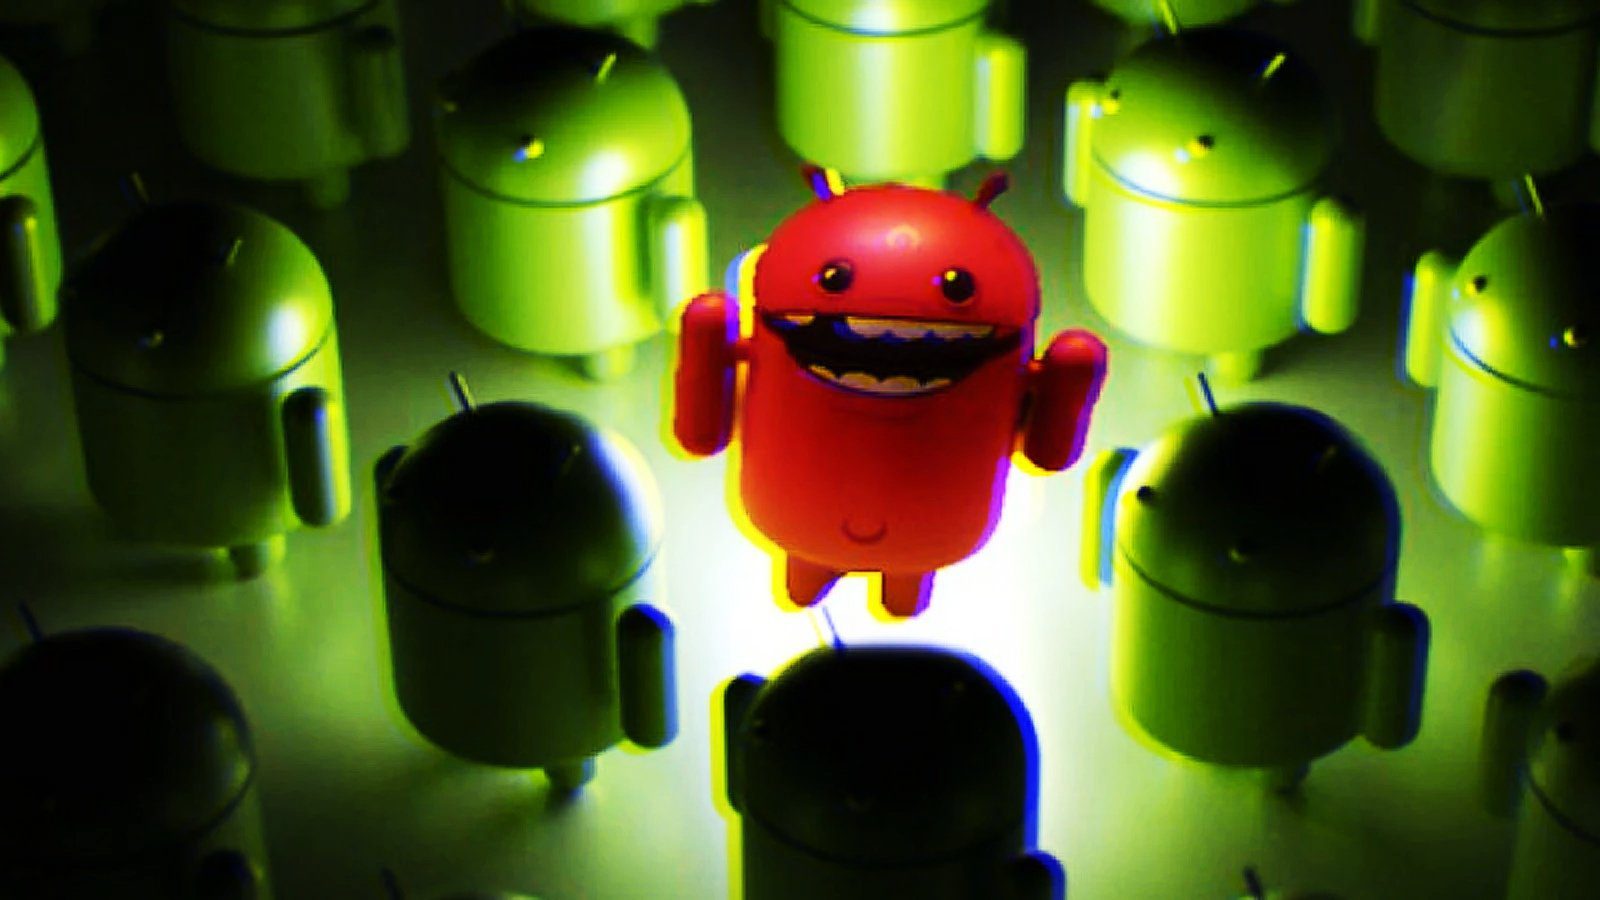 Android spyware camouflaged as VPN, chat apps on Google Play – Source: www.bleepingcomputer.com